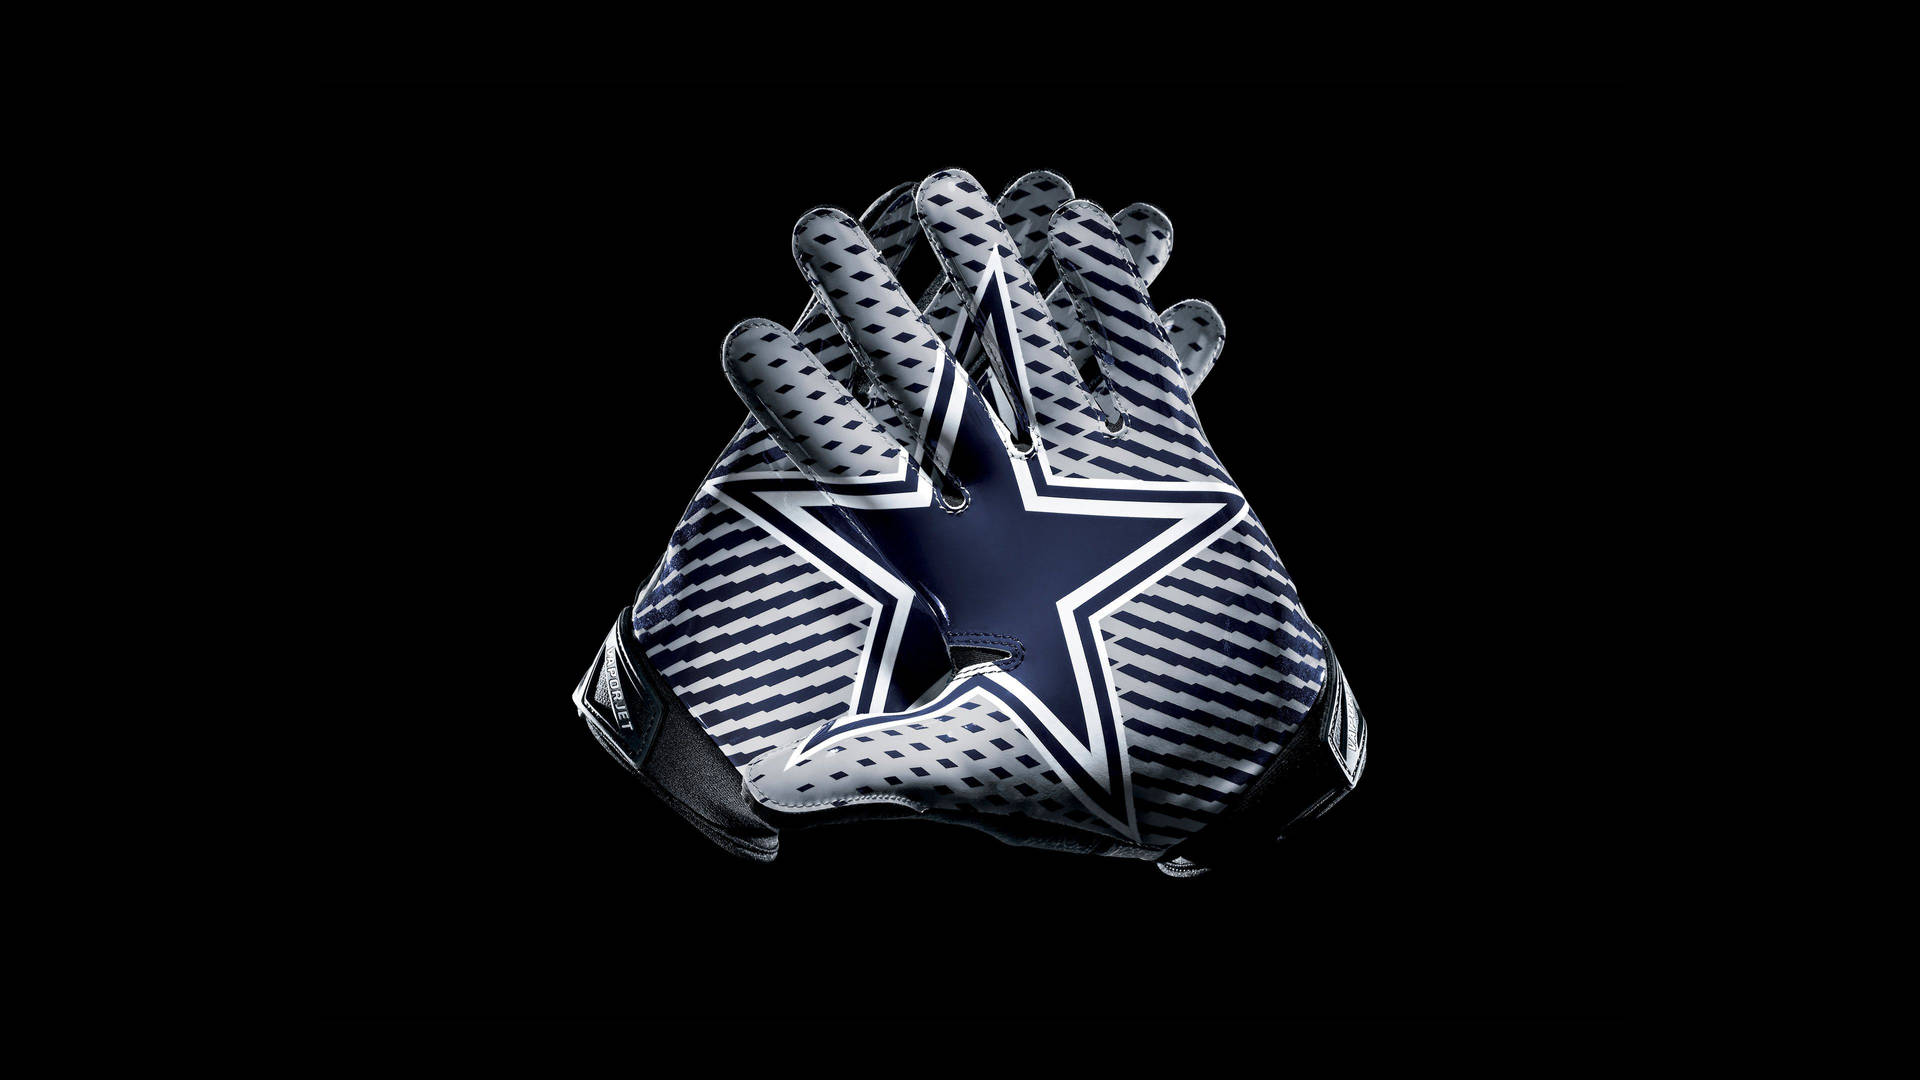 Dallas Cowboys 3840X2160 Wallpaper and Background Image